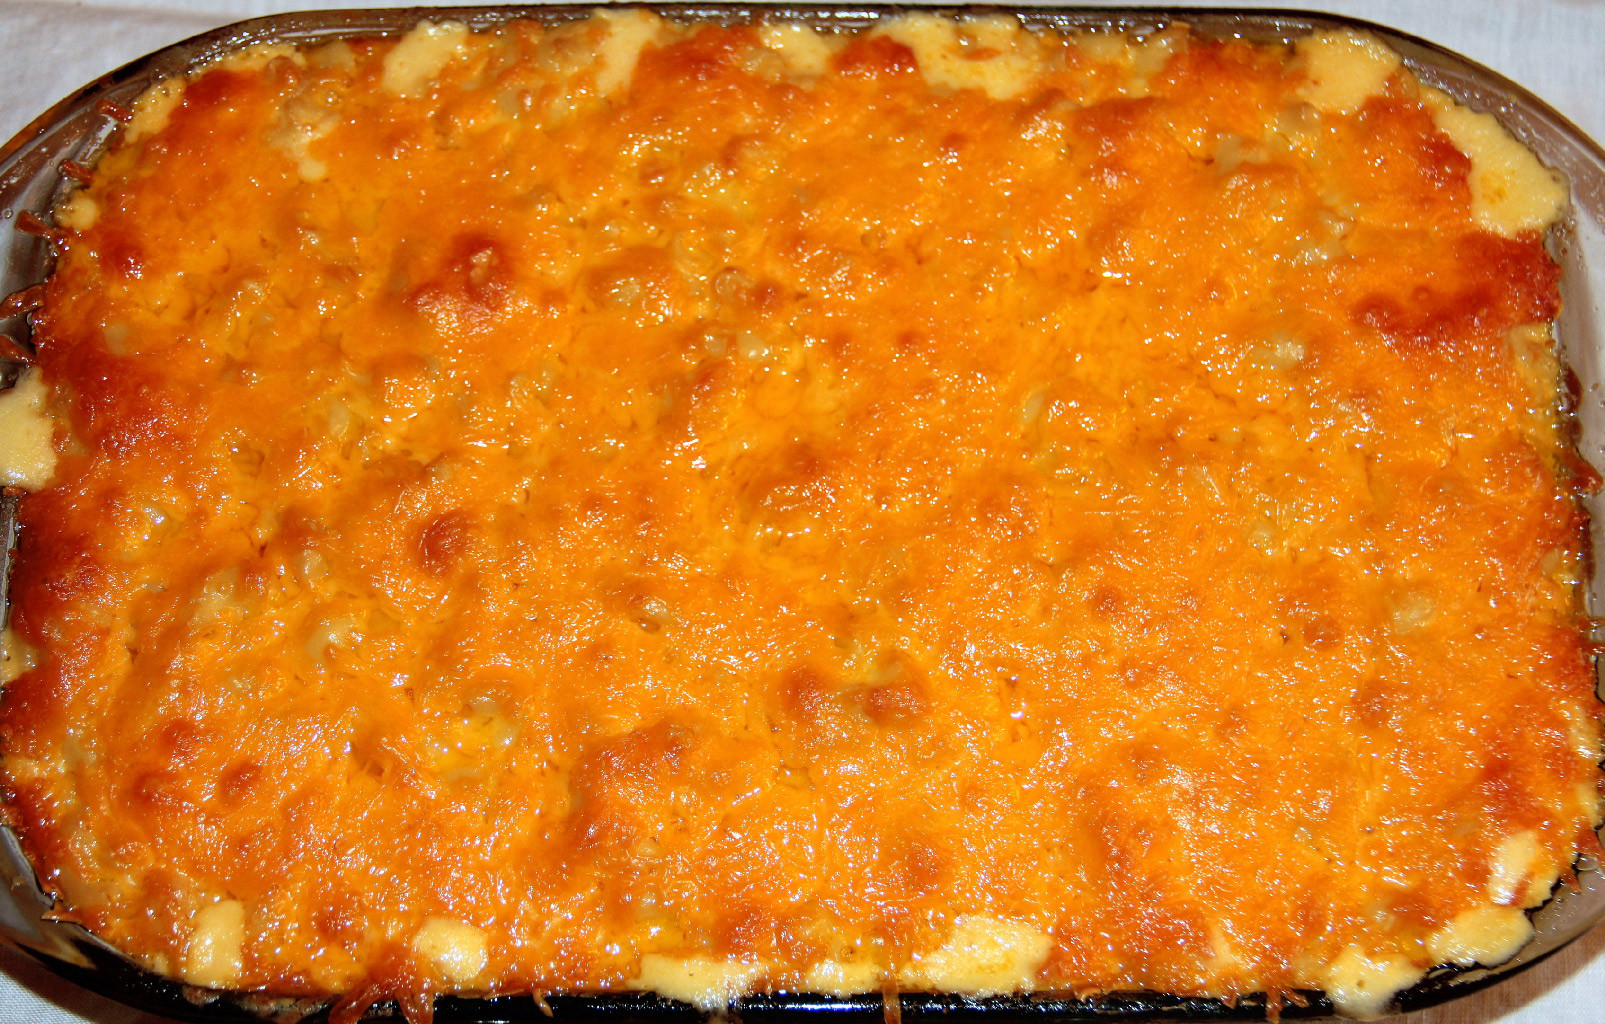 Best Macaroni and Cheese Baked Beautiful Baked Macaroni and Cheese the Best